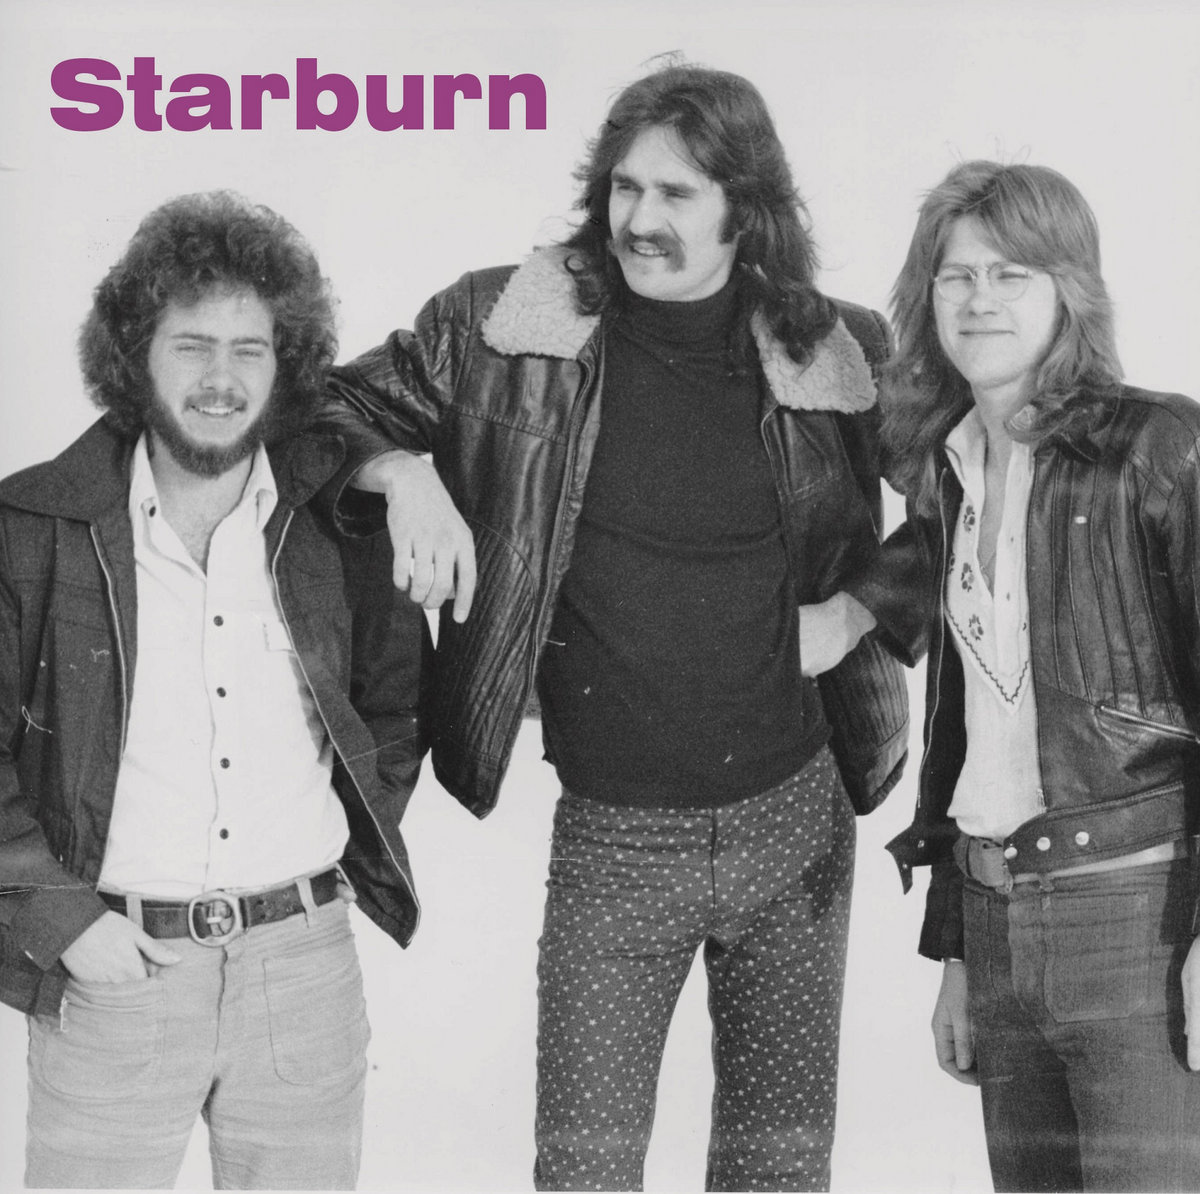 Starburn: first rock band. All songs Chelsom, Higbee and Mowbray